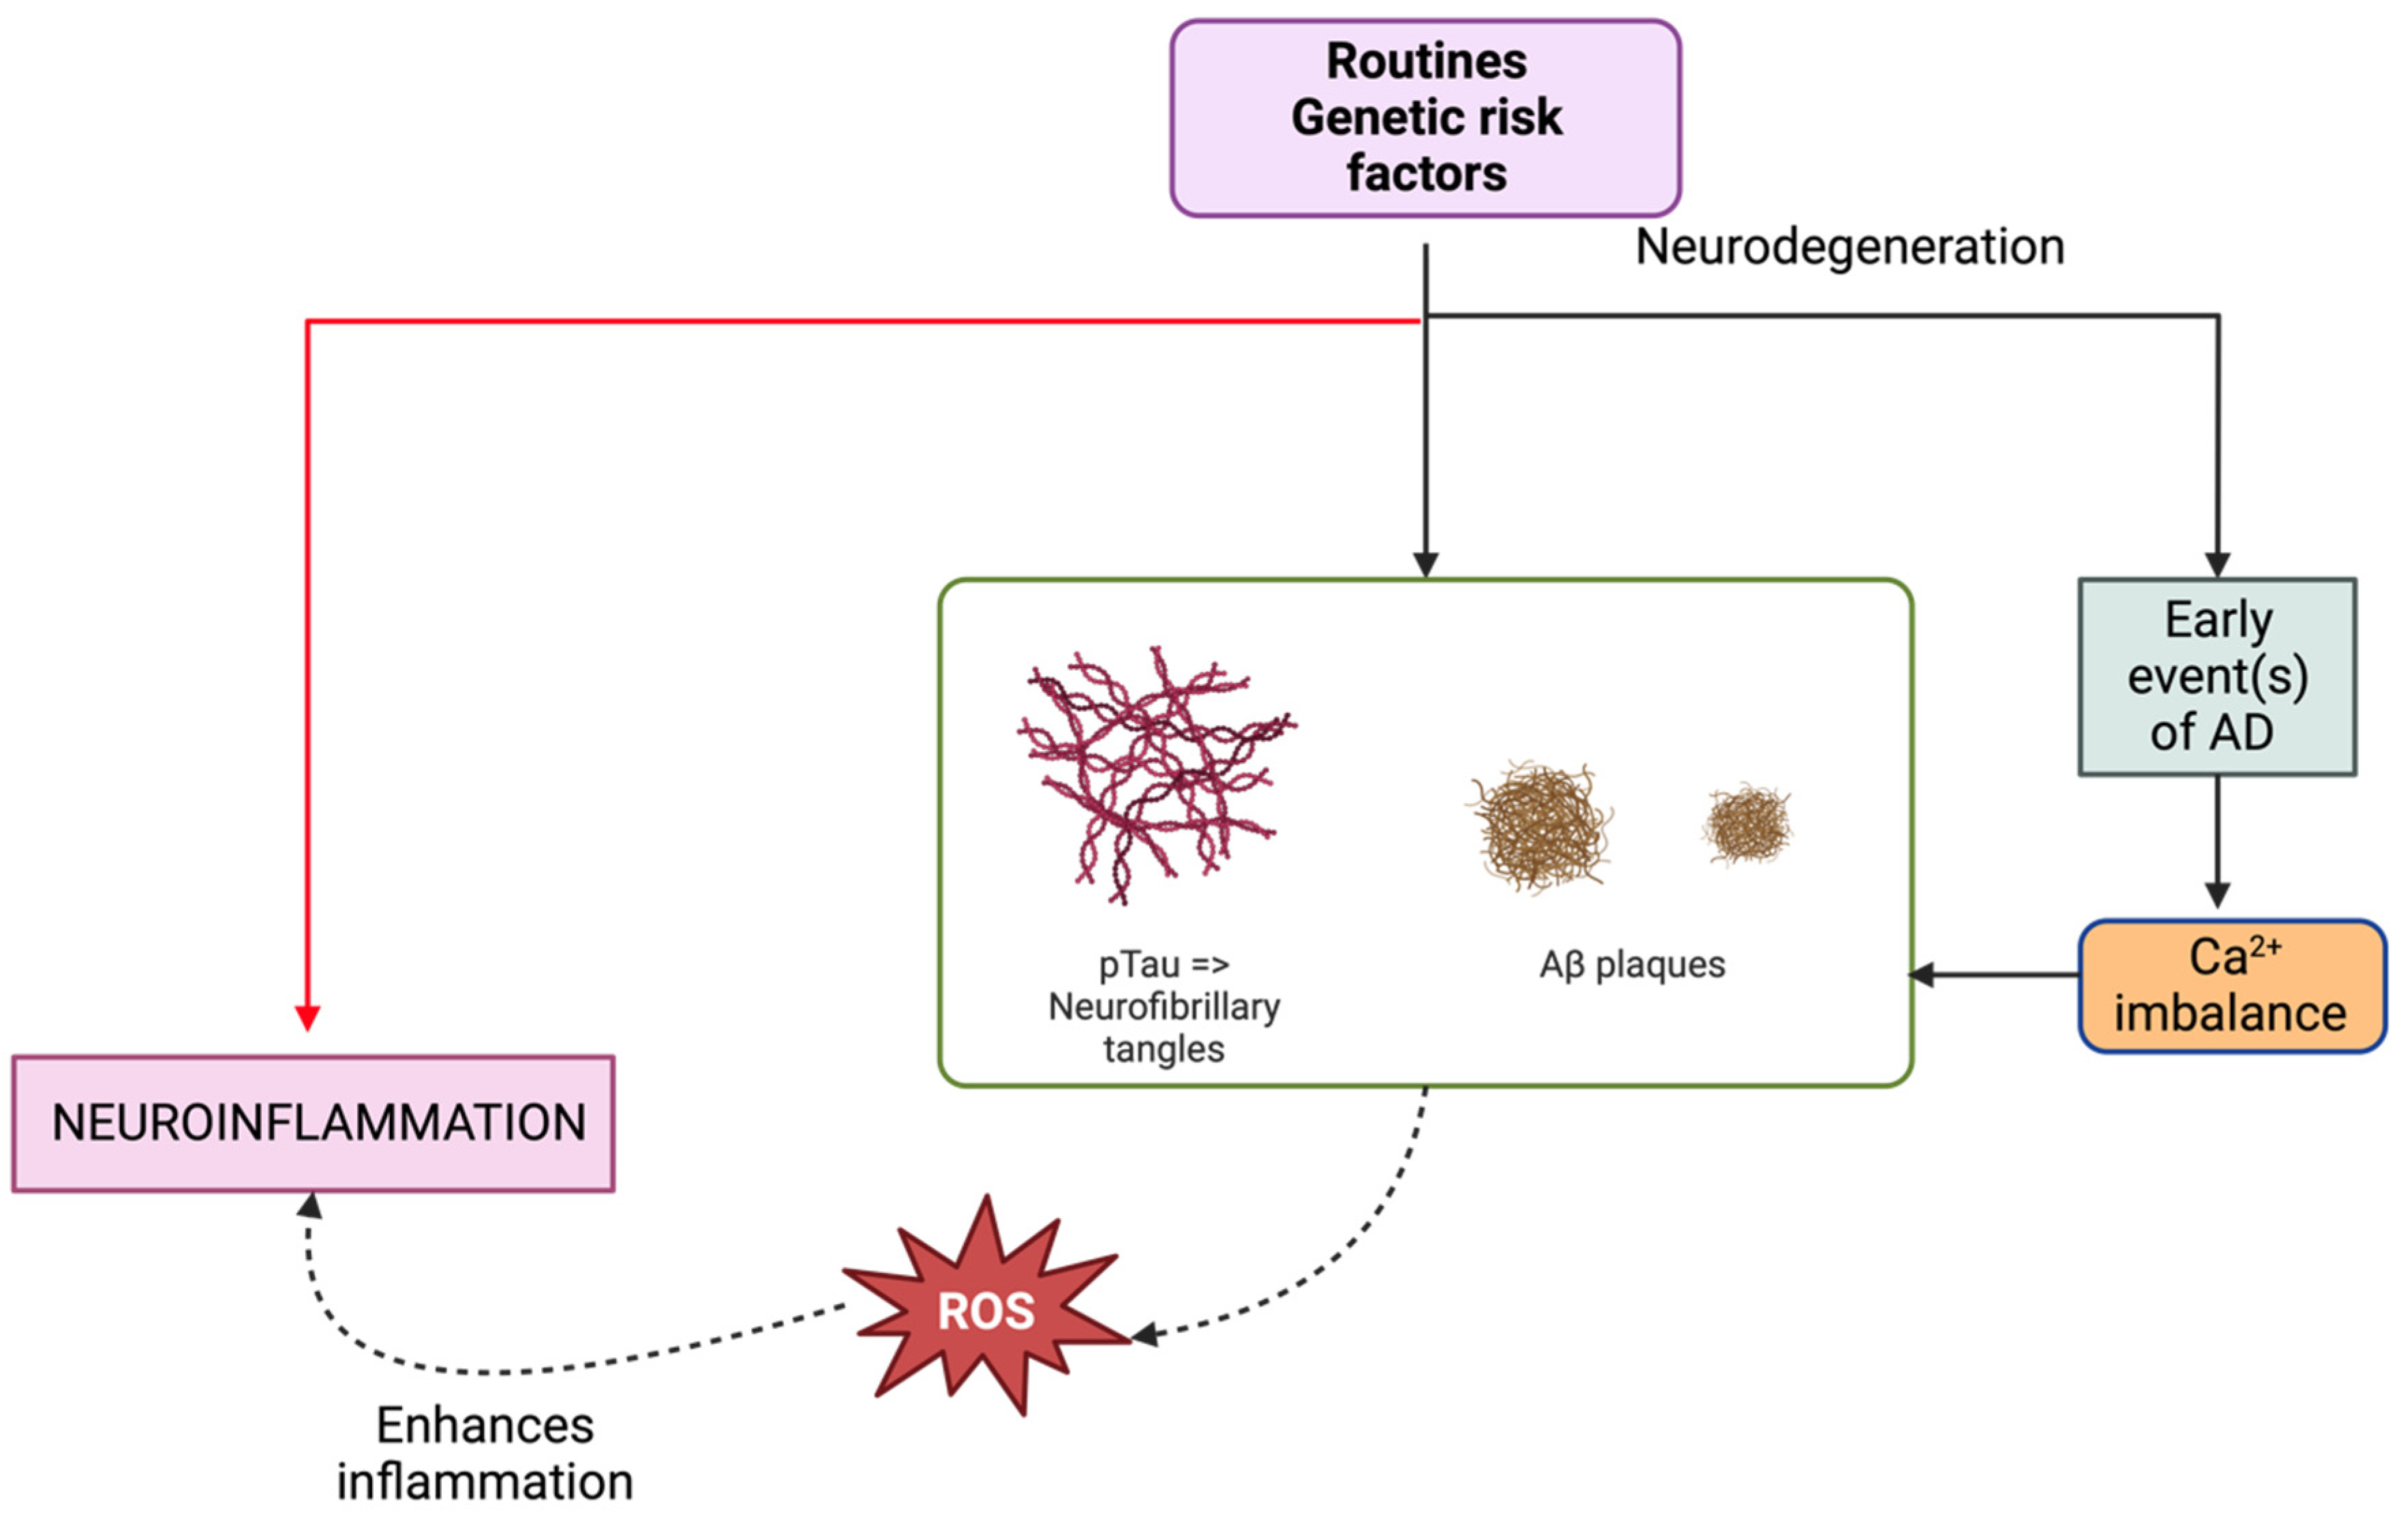 NfL as a biomarker for neurodegeneration and survival in Parkinson